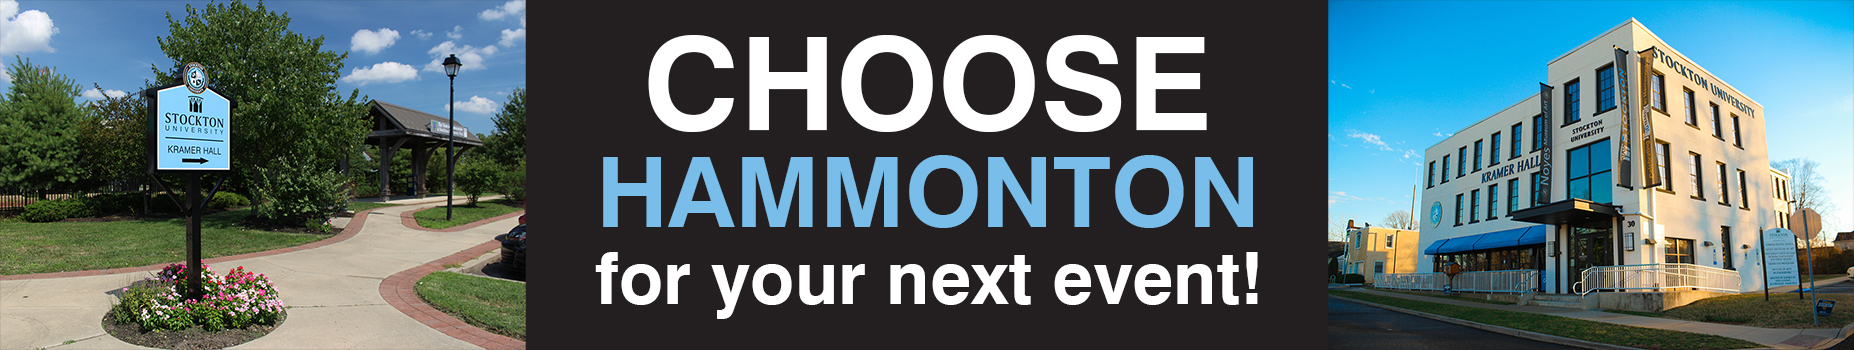 Choose Hammonton for your next event!